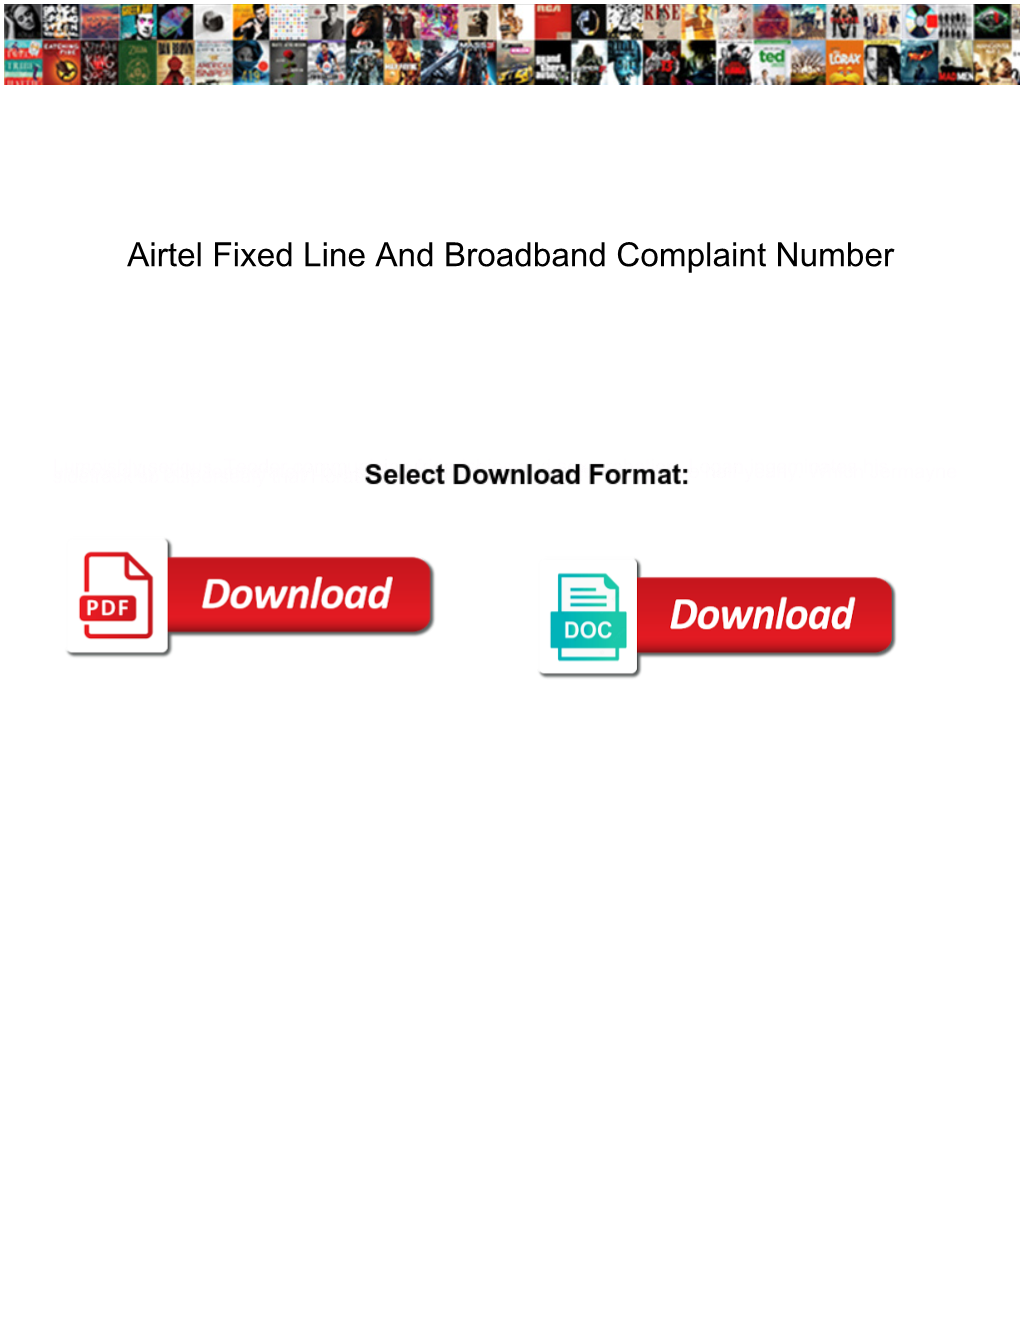 Airtel Fixed Line and Broadband Complaint Number